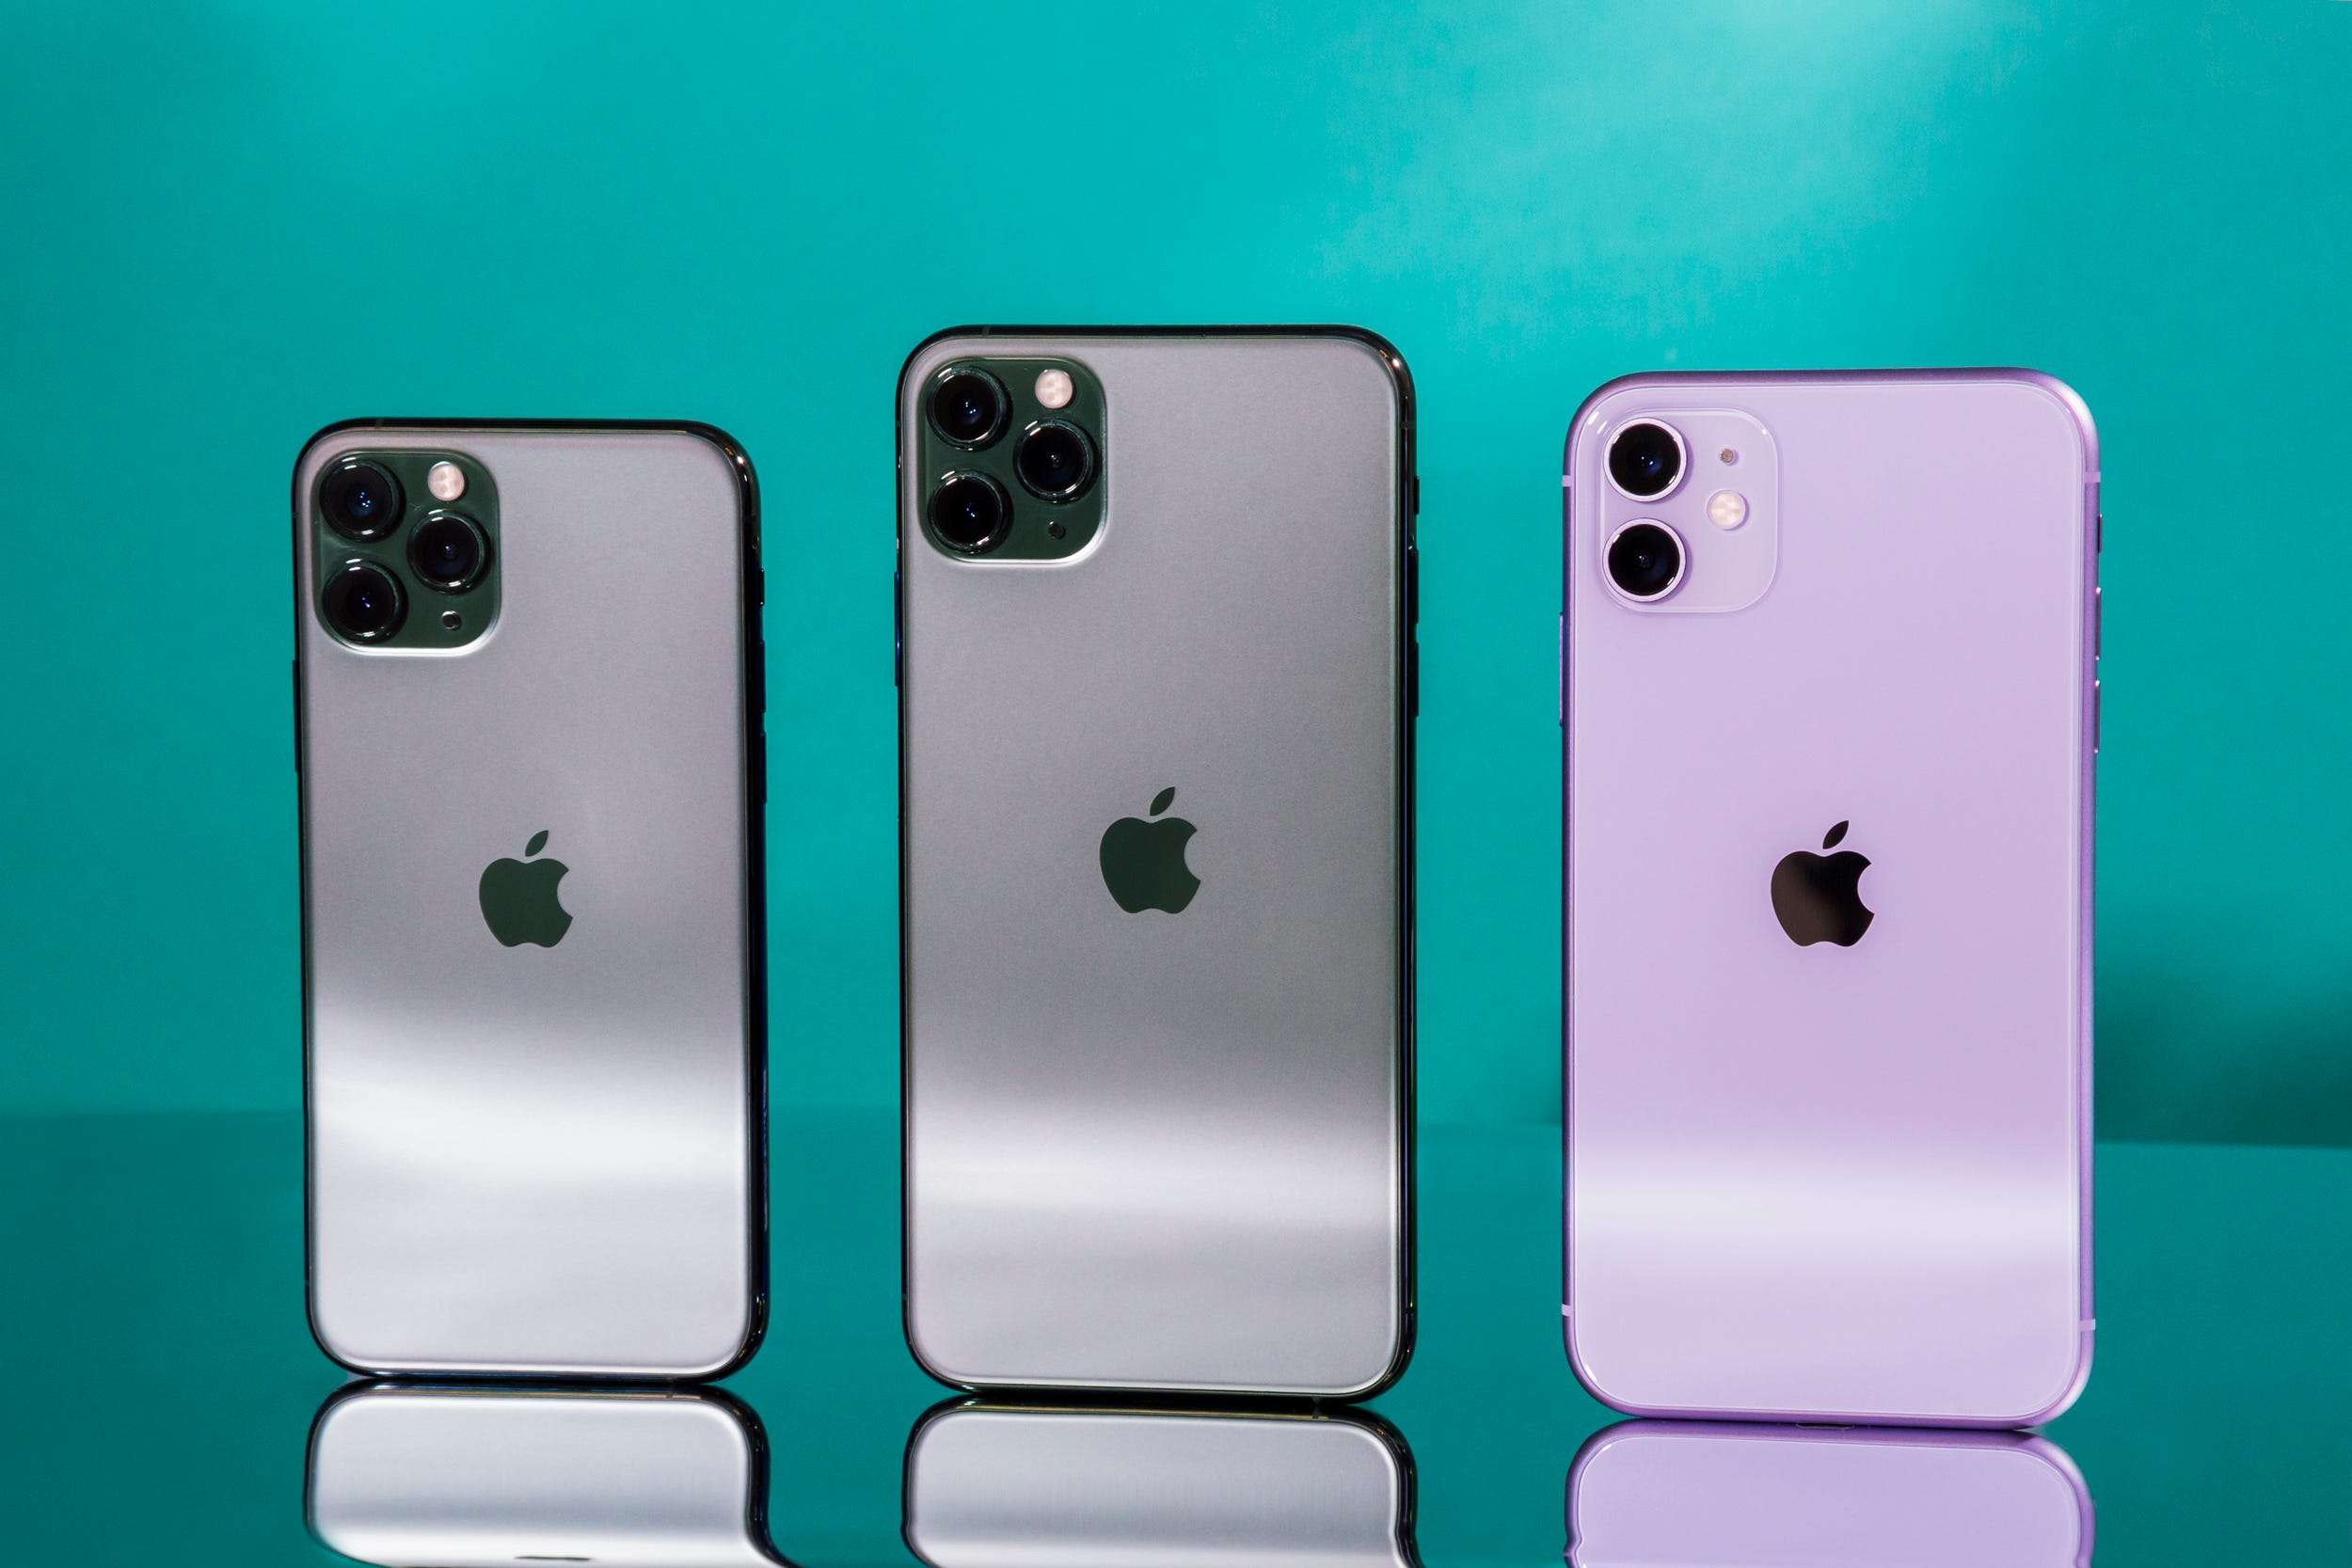 Apple Iphone 12 Price Leak Suggests It May Be Cheaper Than Iphone 11 Business Insider